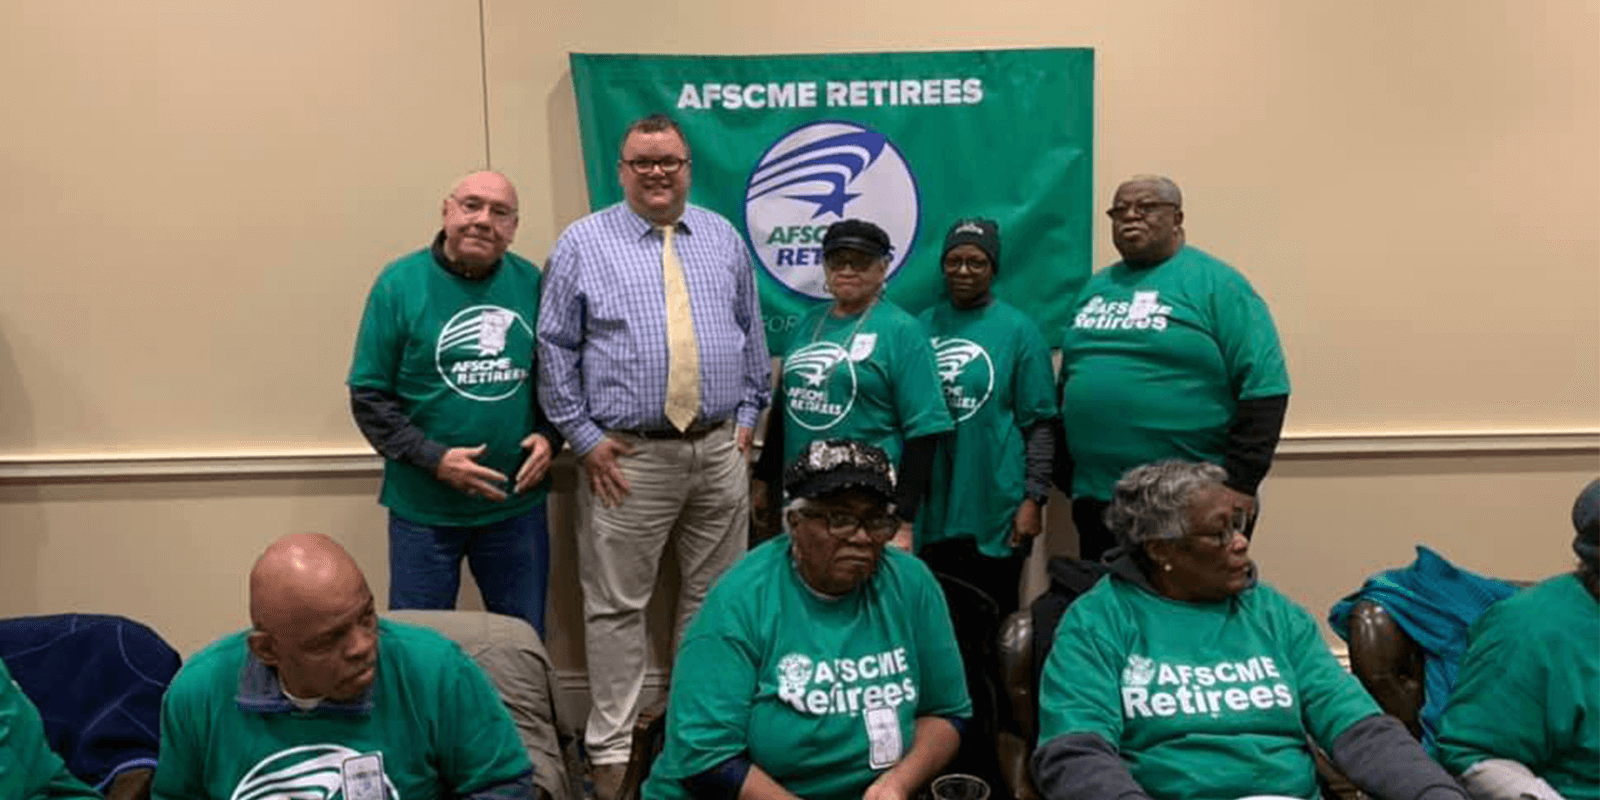 AFSCME Retirees Gained 100% Support for Retiree Rx Plan from MD Senate; House is Next